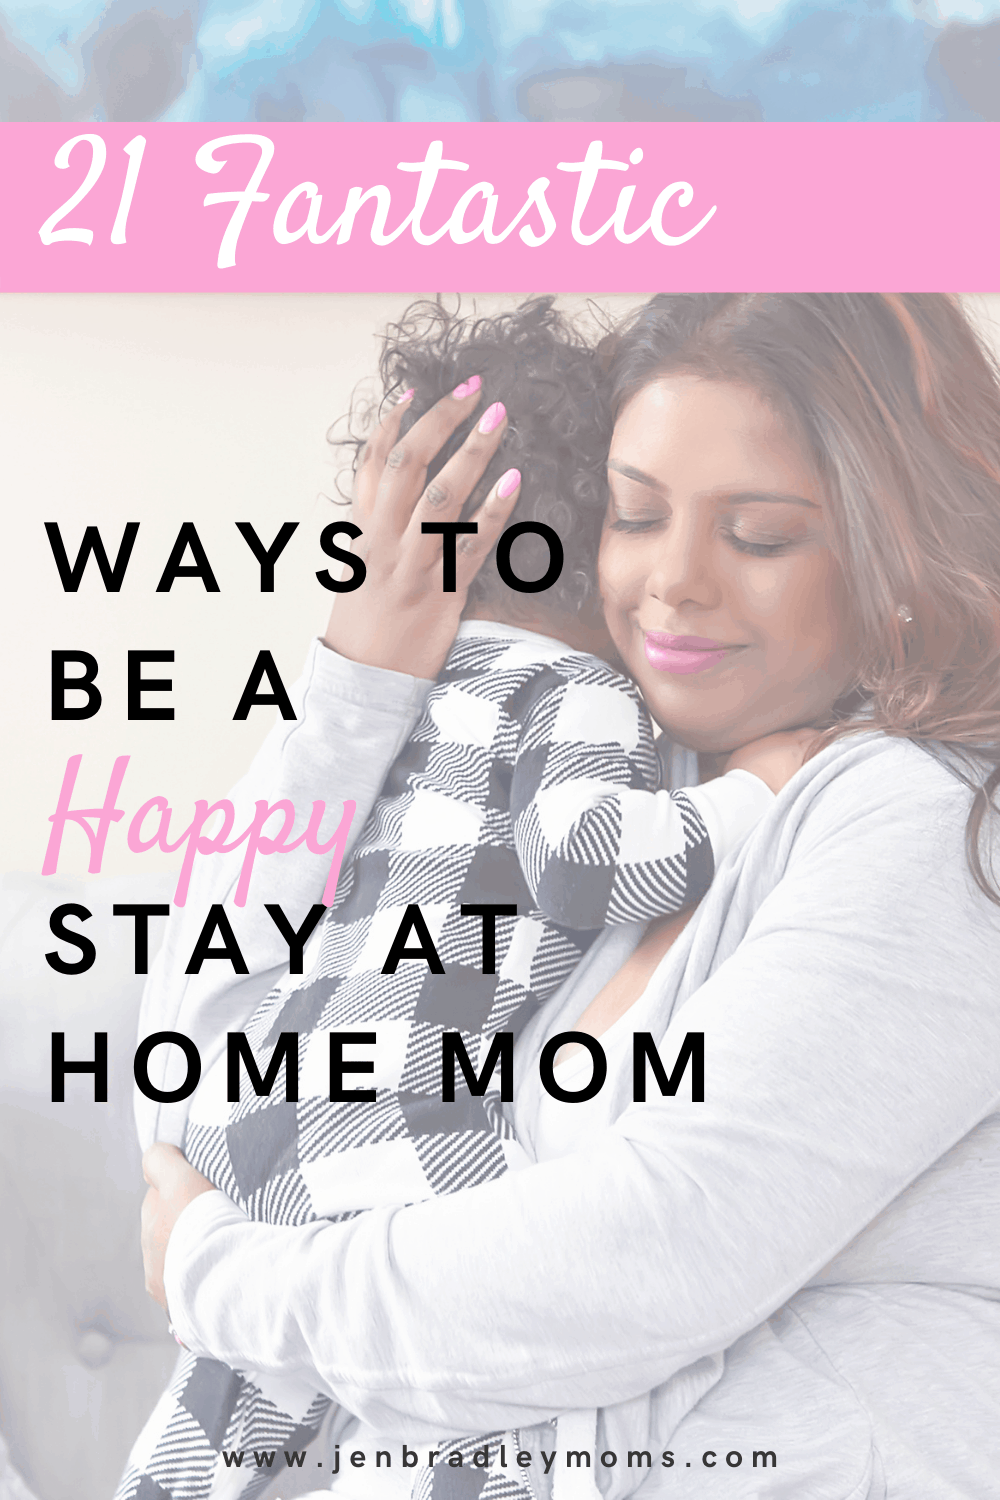 21 Great Ideas to Help You Be a Happy Stay-at-Home Mom